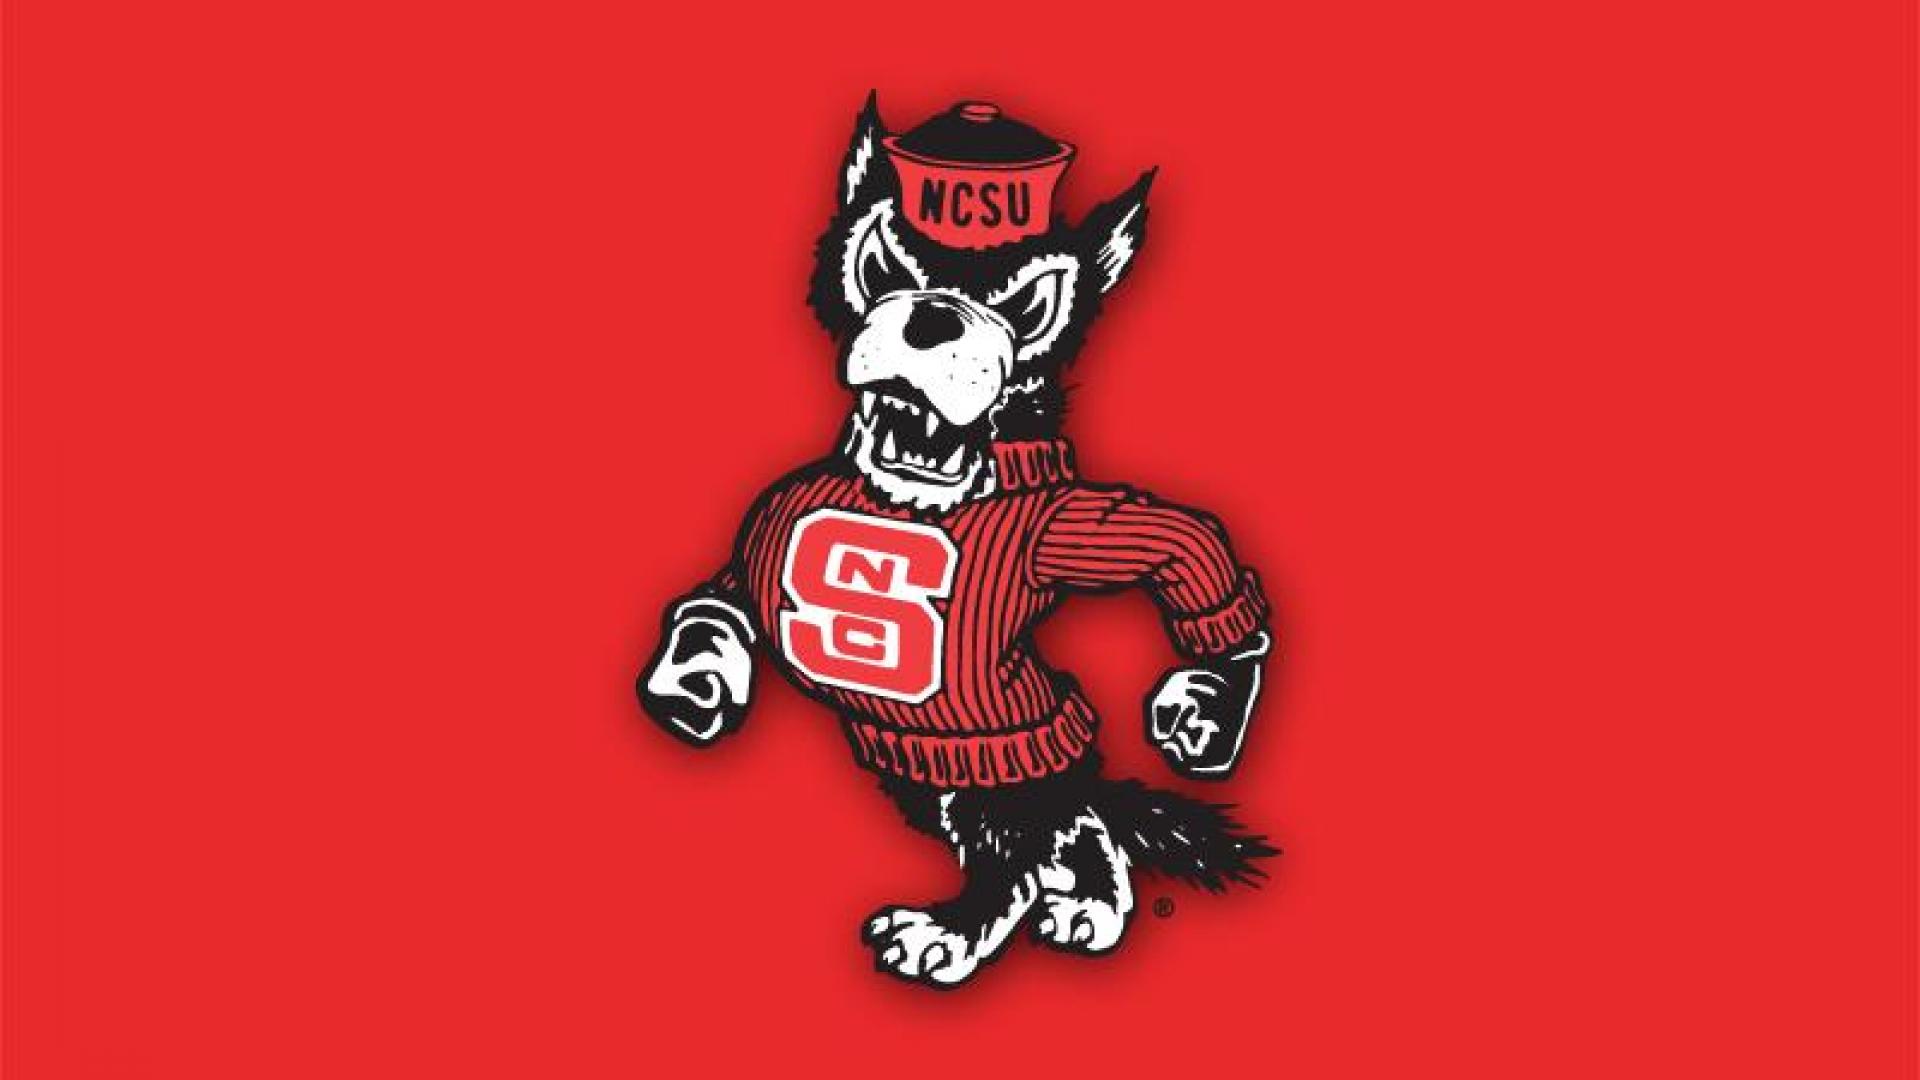 Free download 56284 High Quality and Resolution Wallpaper on hqWallbasecom [1920x1080] for your Desktop, Mobile & Tablet. Explore NC State Wallpaper for Desktop. NC State Wolfpack Wallpaper, NC State